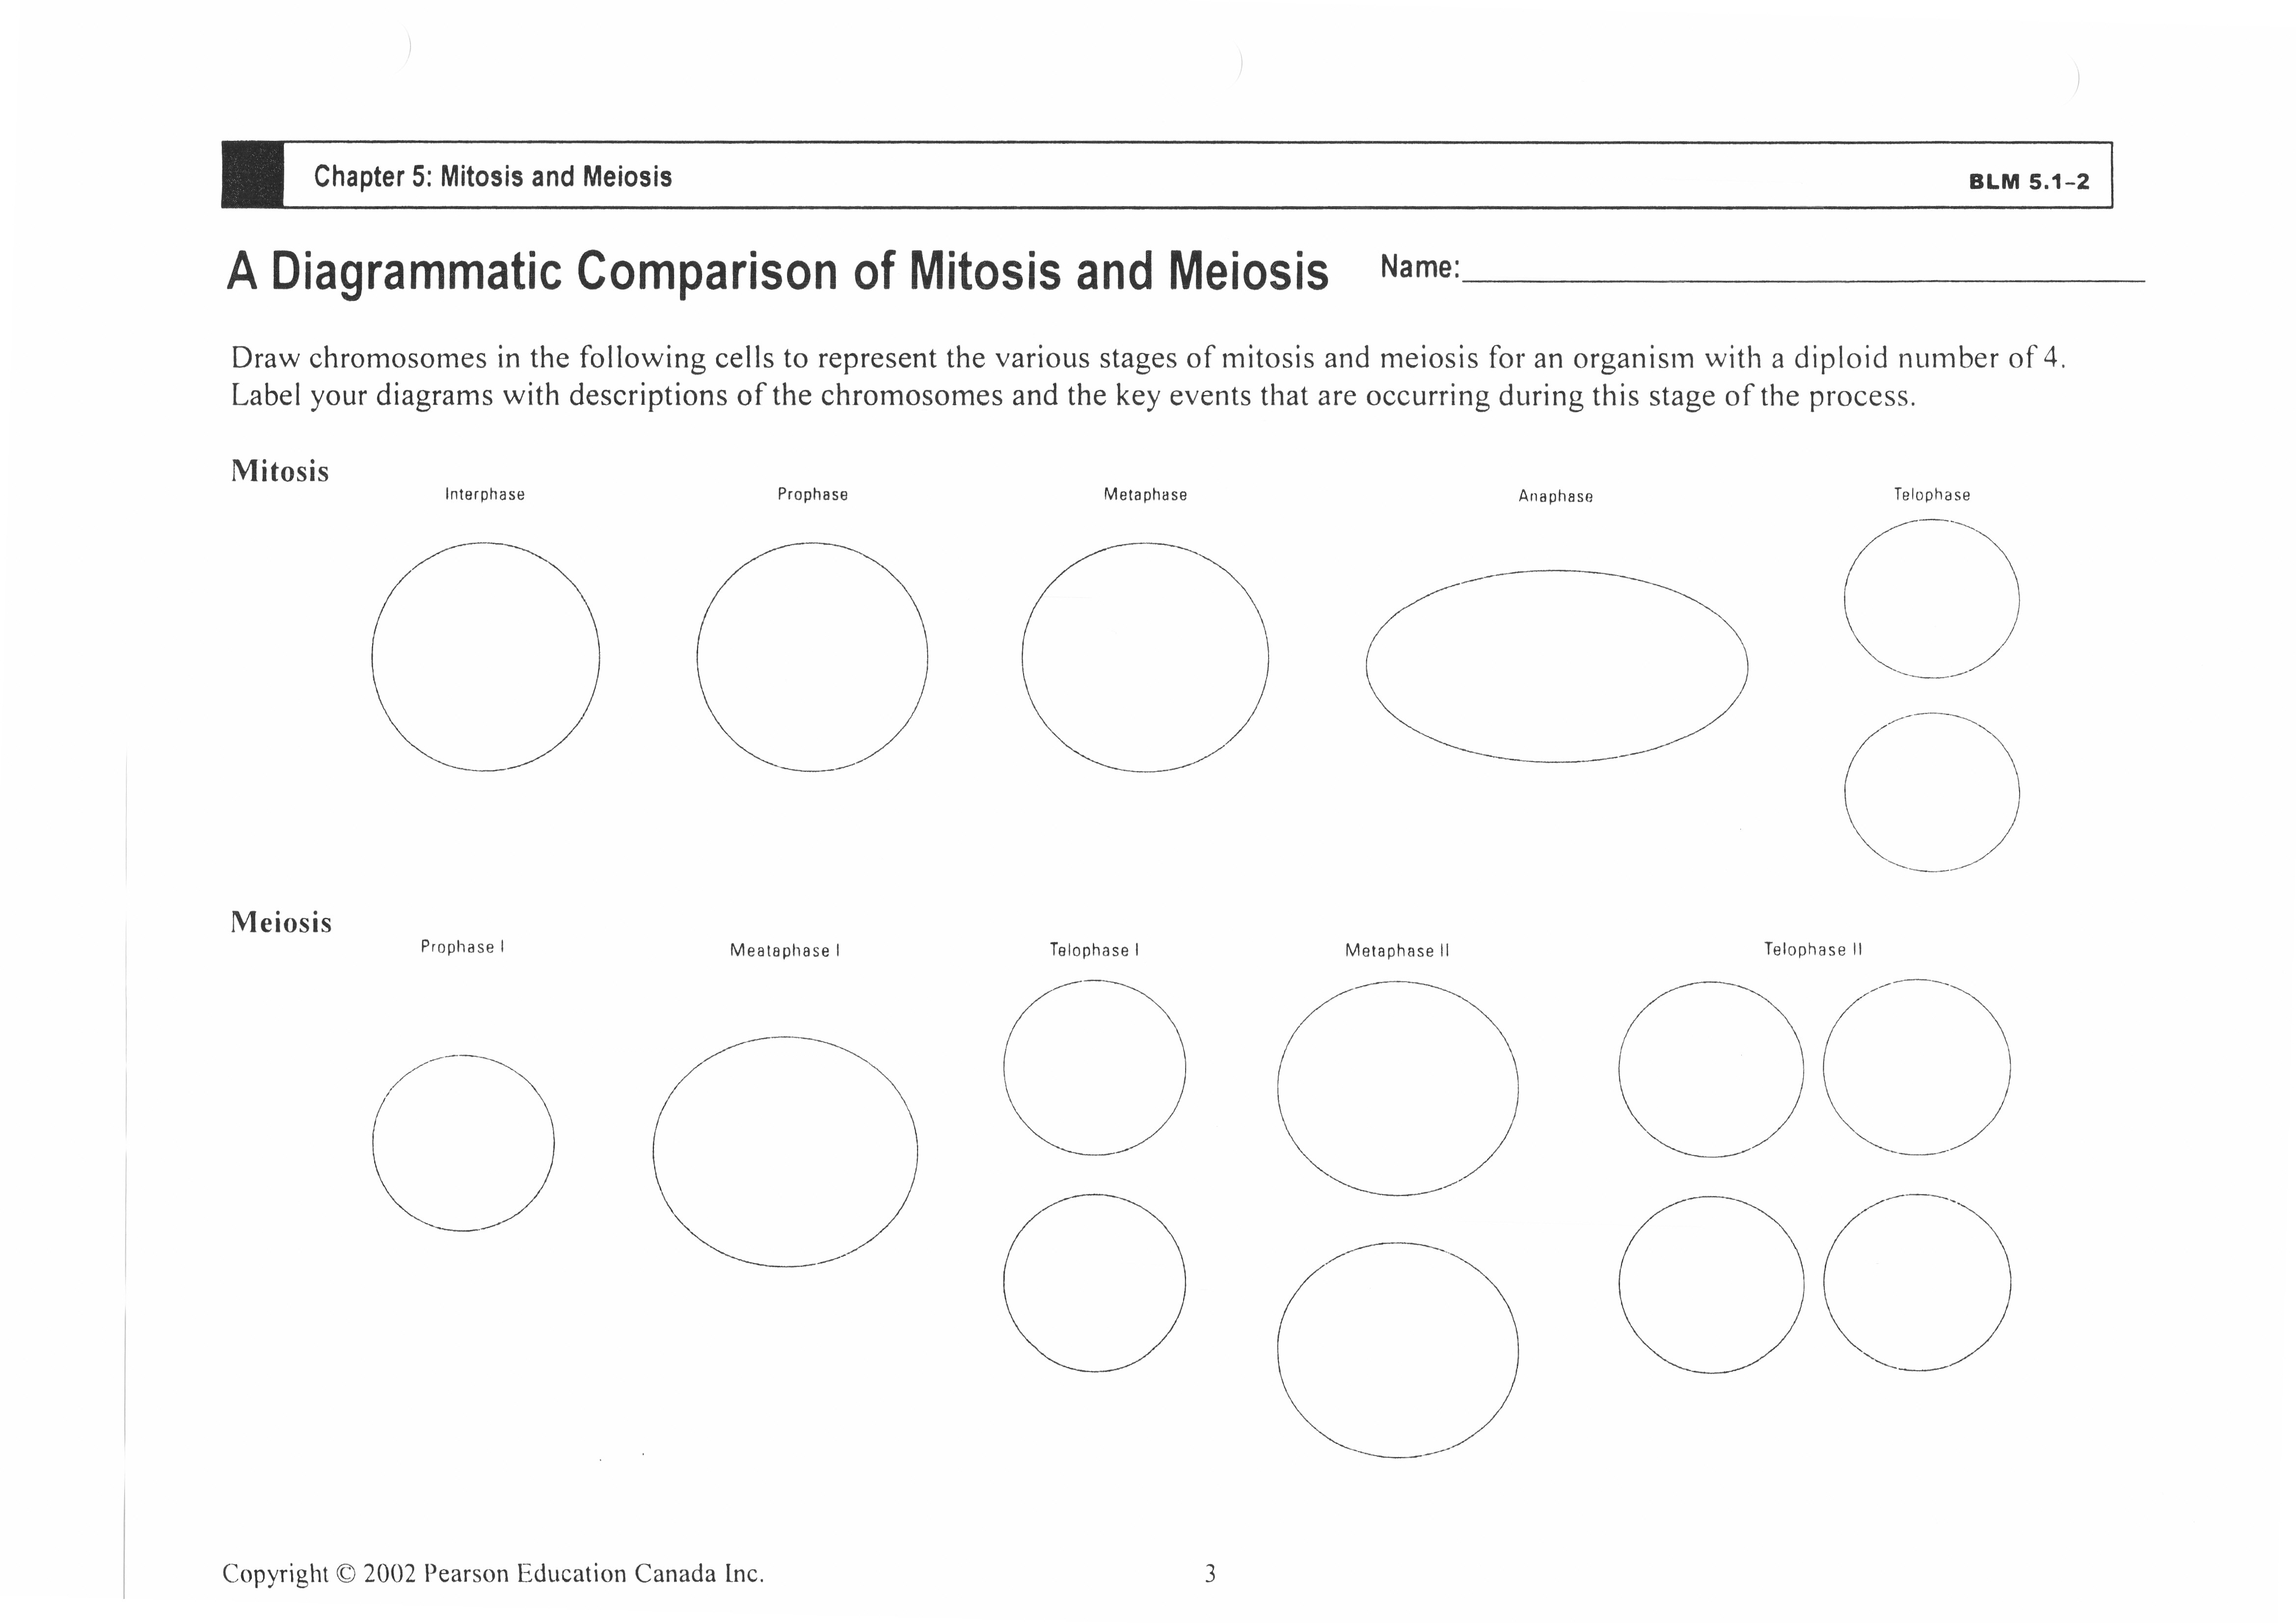 Comparing Mitosis and Meiosis Worksheet Answers Image